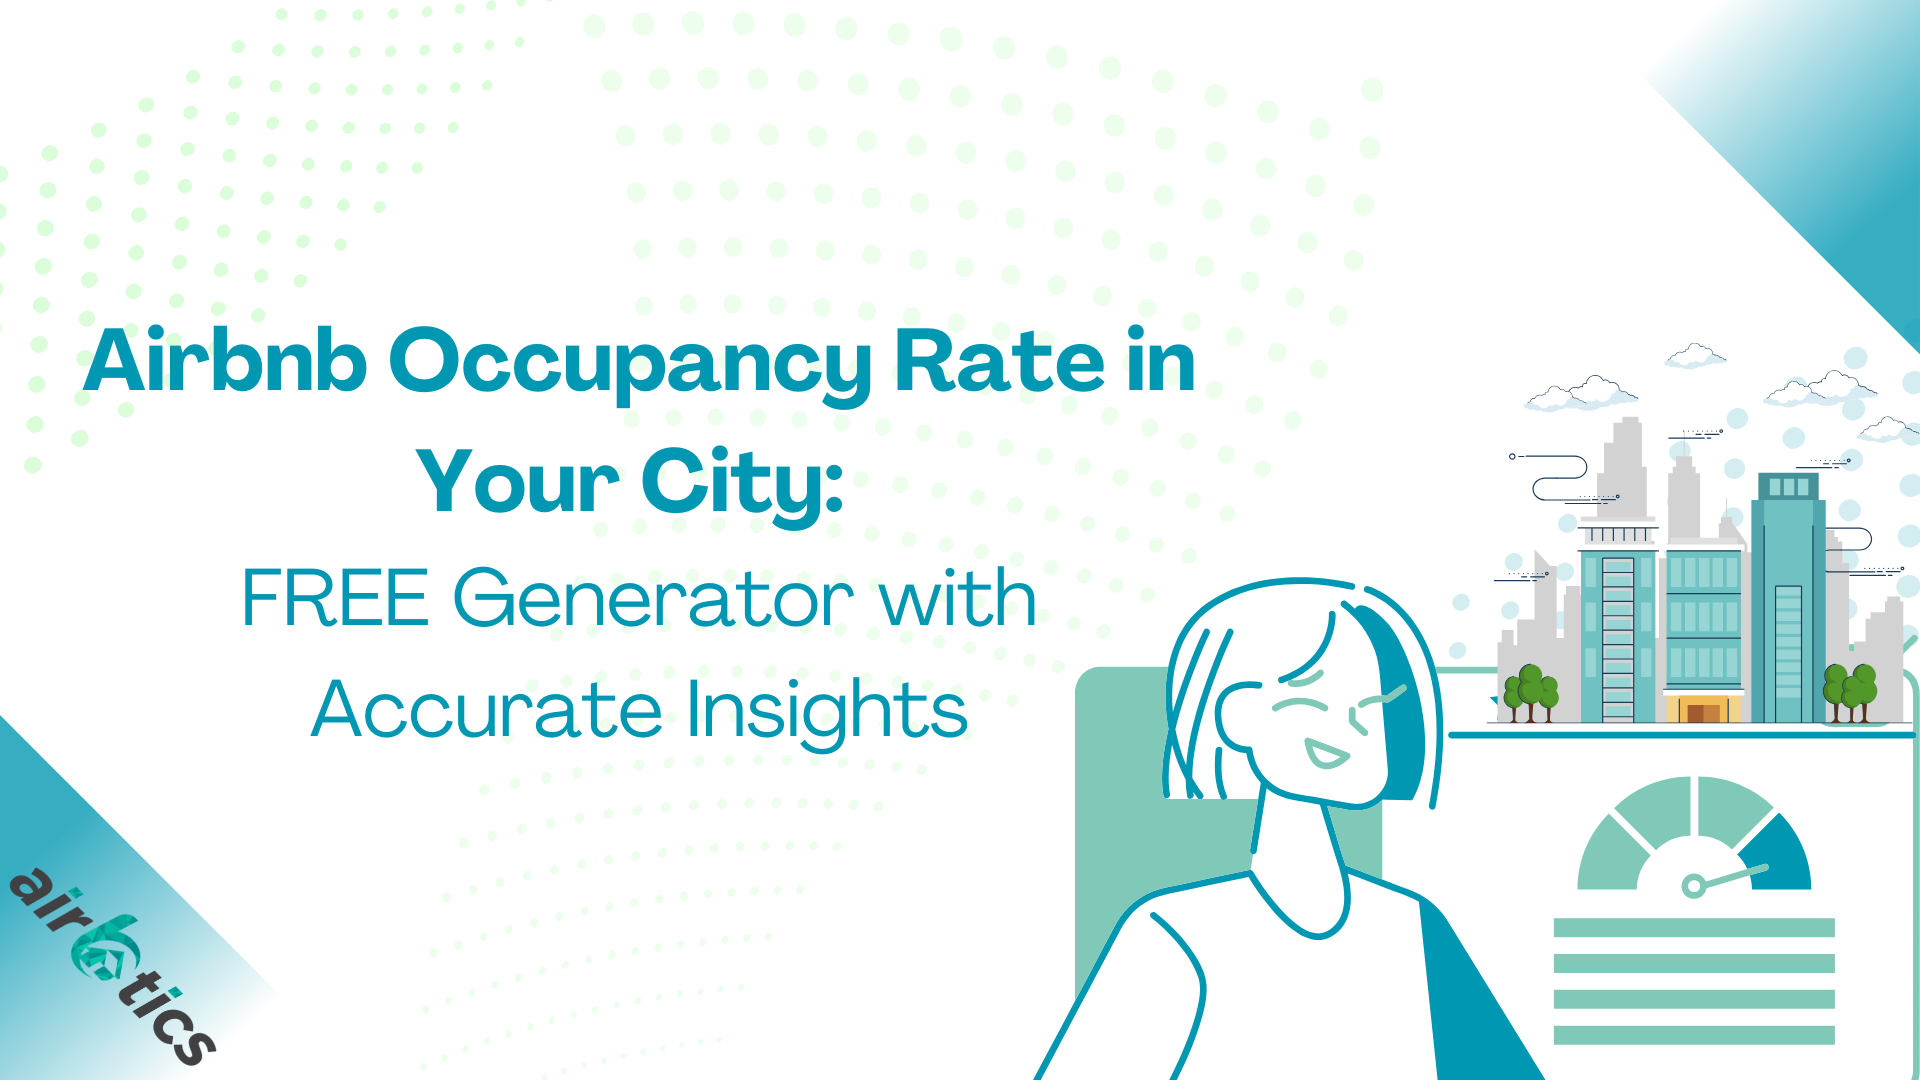 Airbnb Occupancy Rate